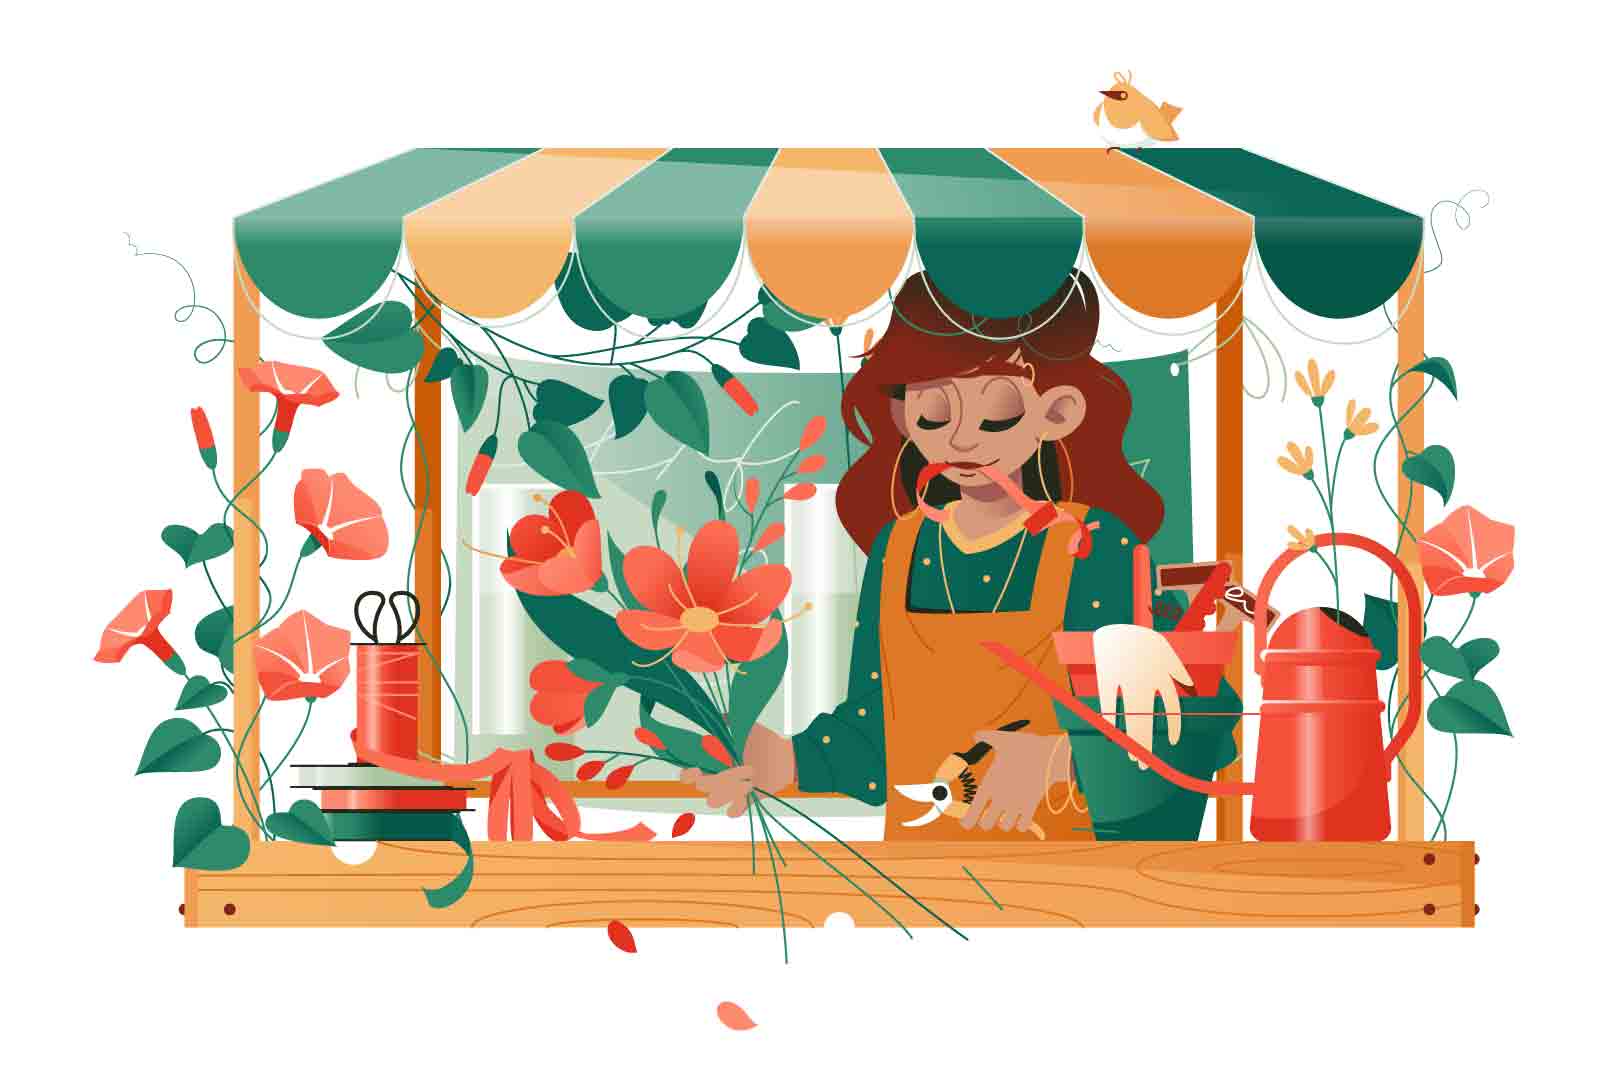 Florist making bouquet in flower shop vector illustration. Woman at work in retail store with plants. Floristics flat concept